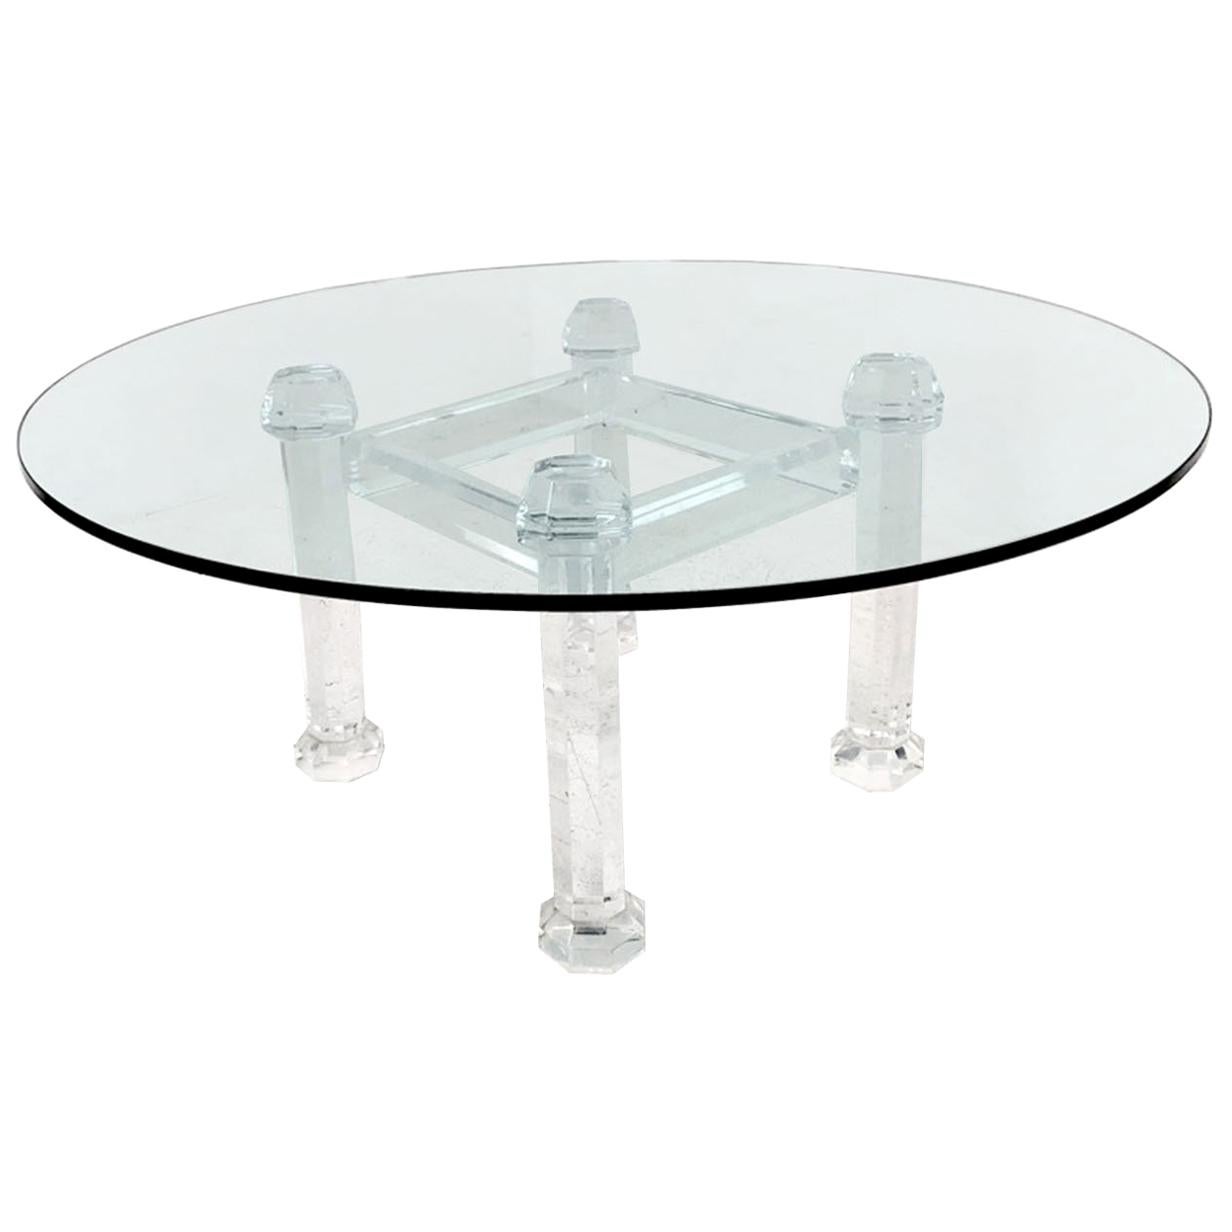 Prismatic Lucite Dining Table by Allan Knight